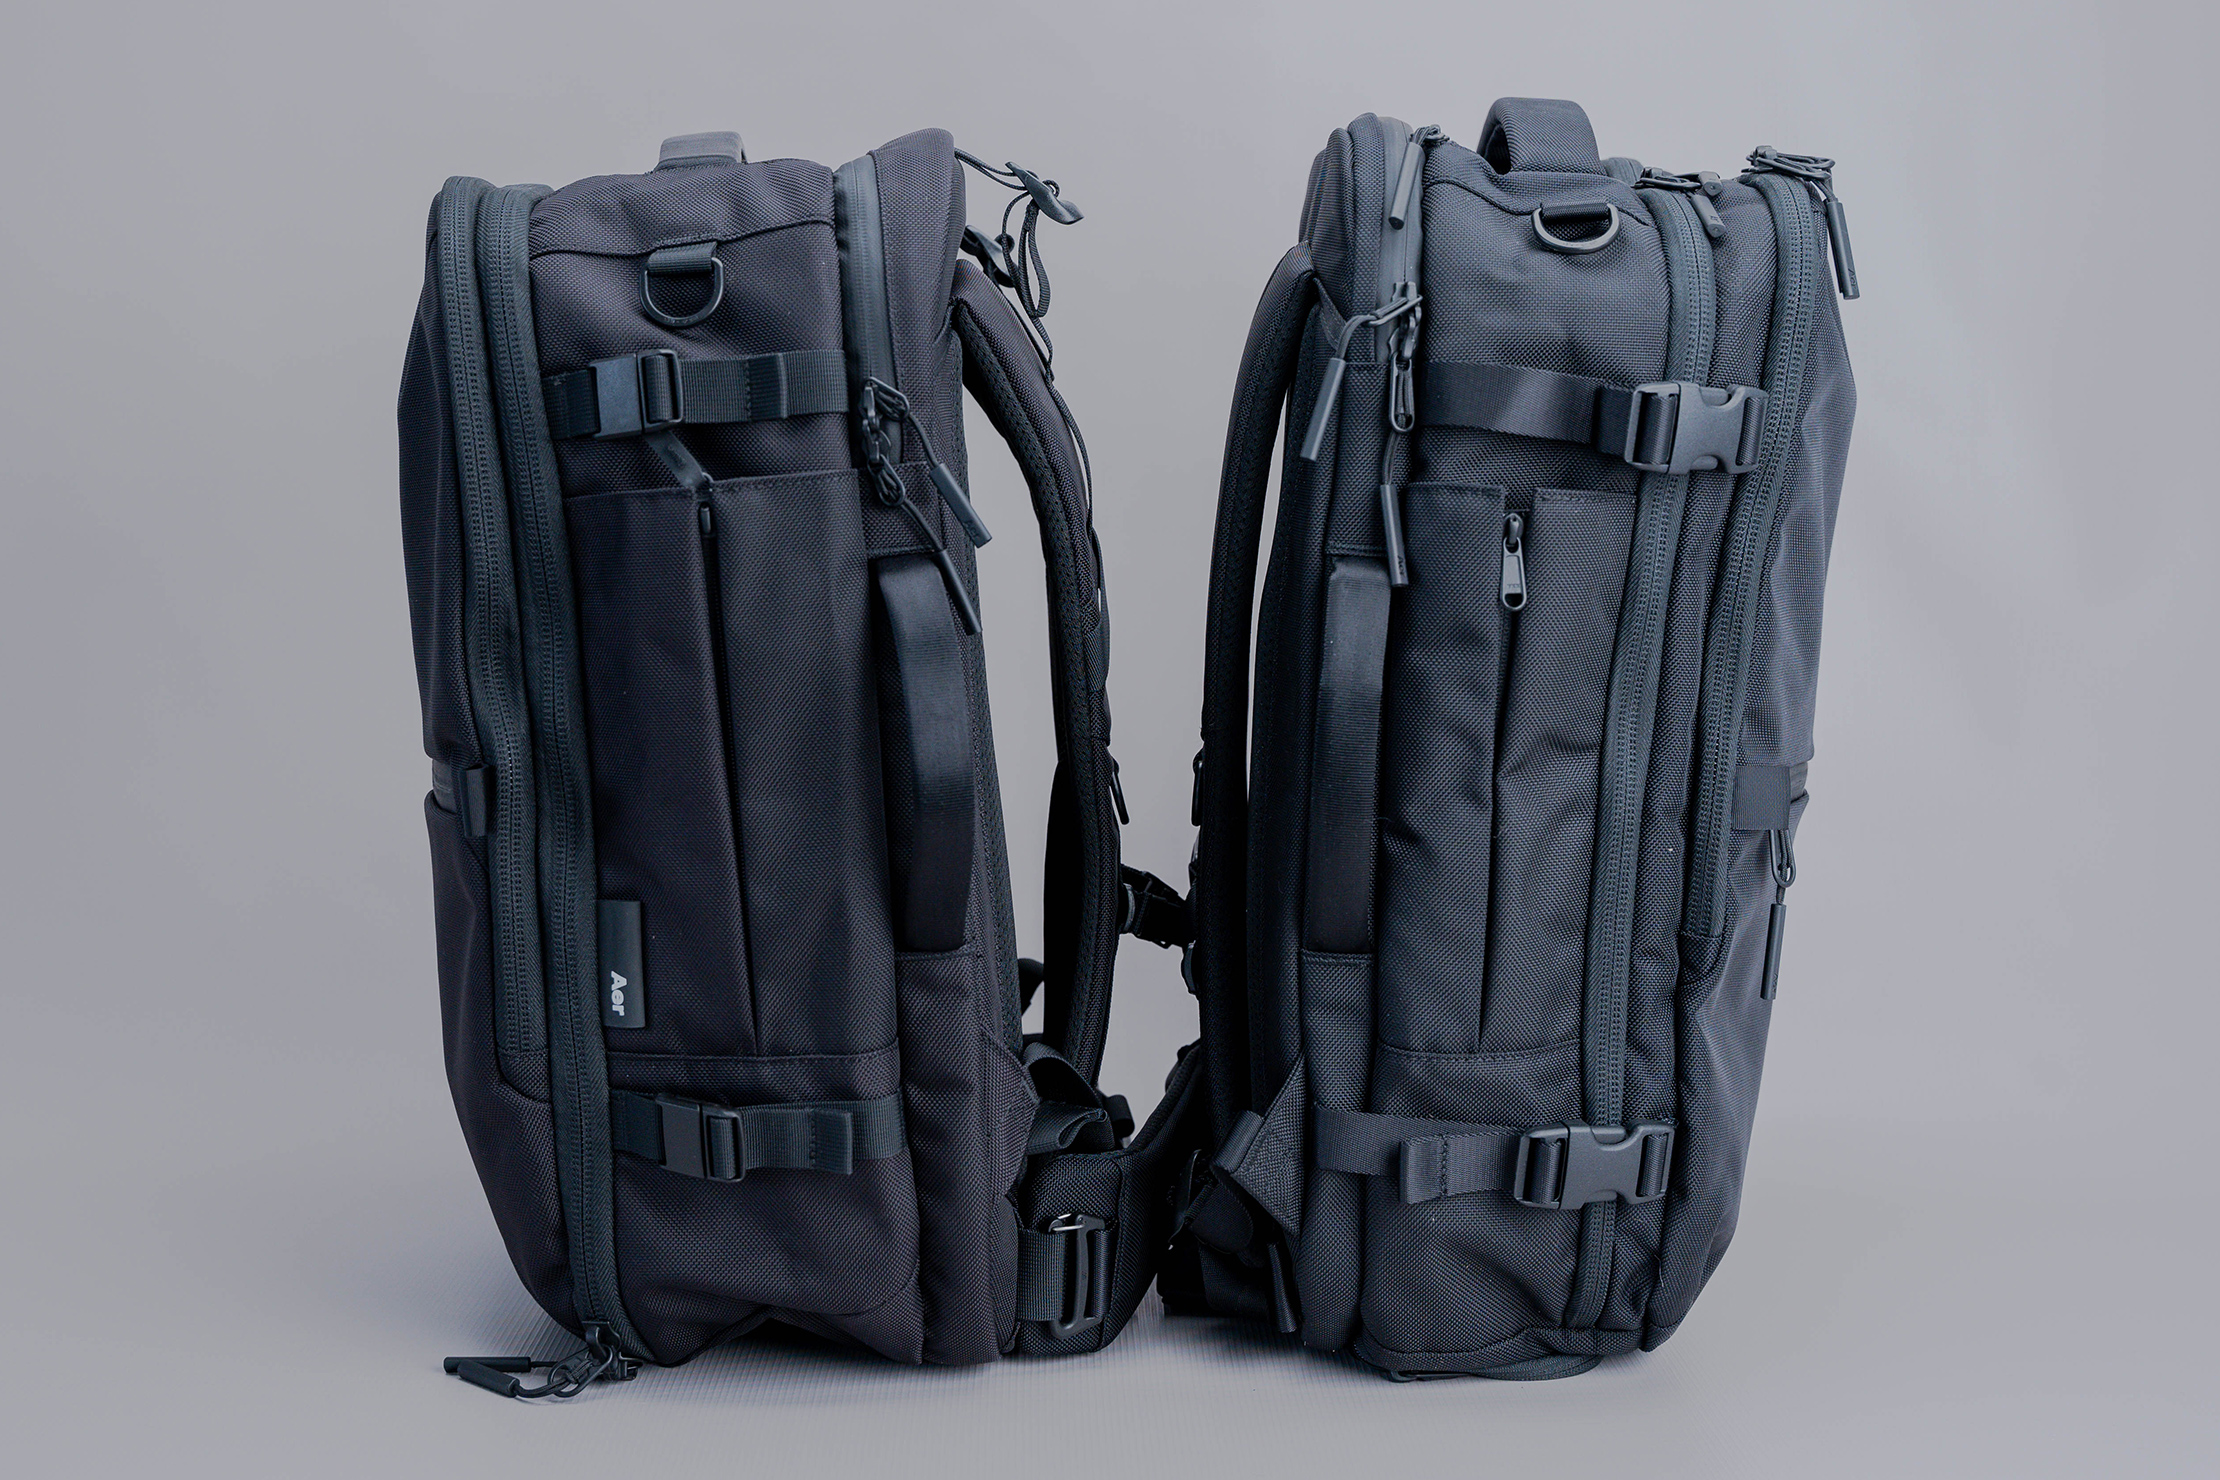 Aer Travel Pack 3 and Travel Pack 2 Side